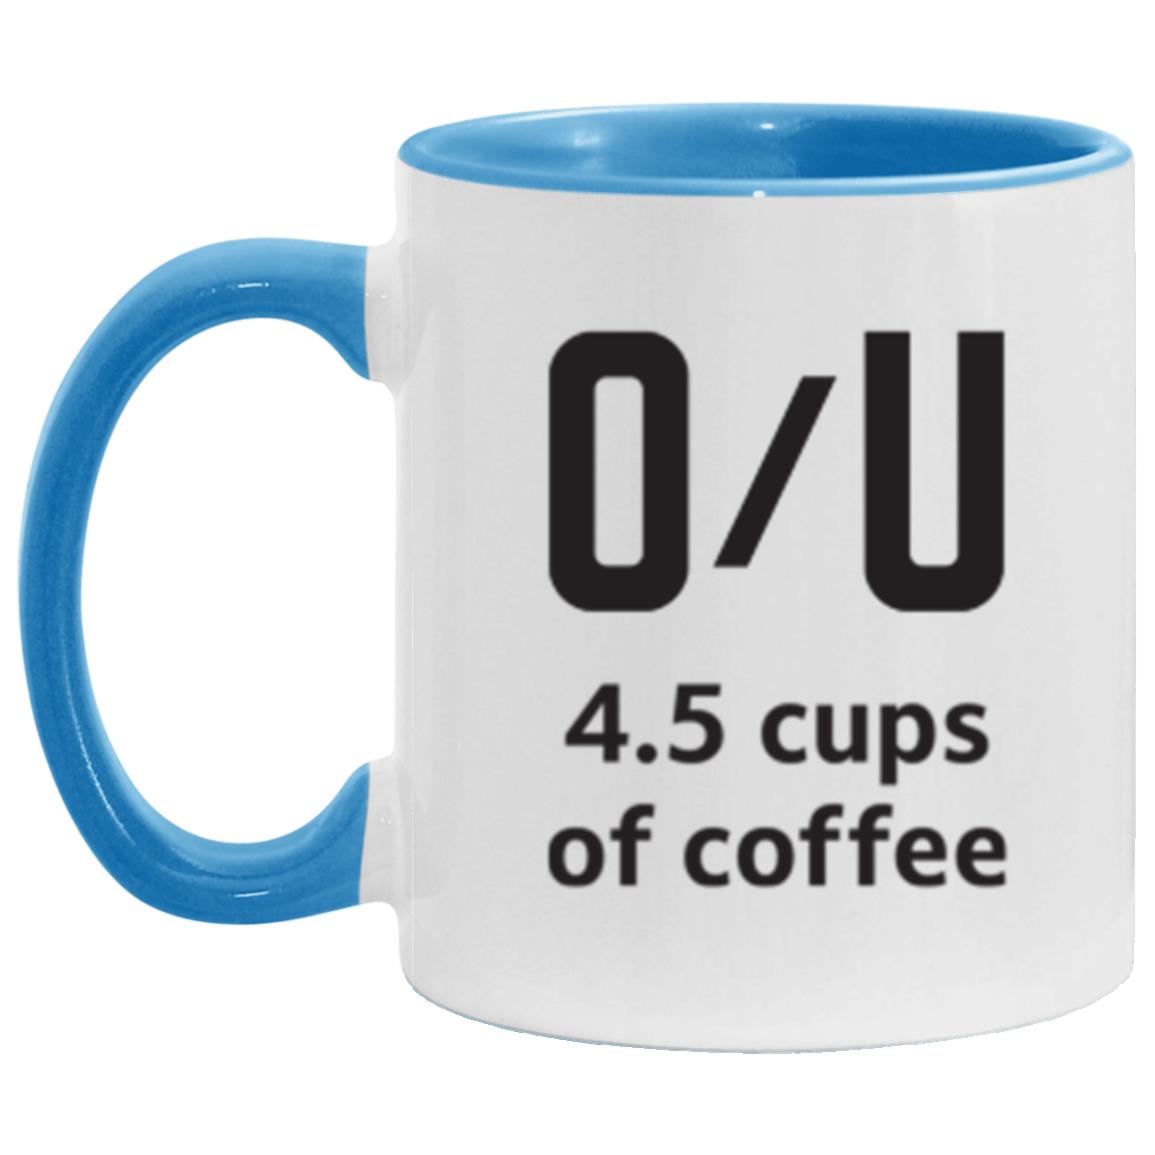 Over / Under 4.5 cups of coffee - 11 oz. Accent Mug